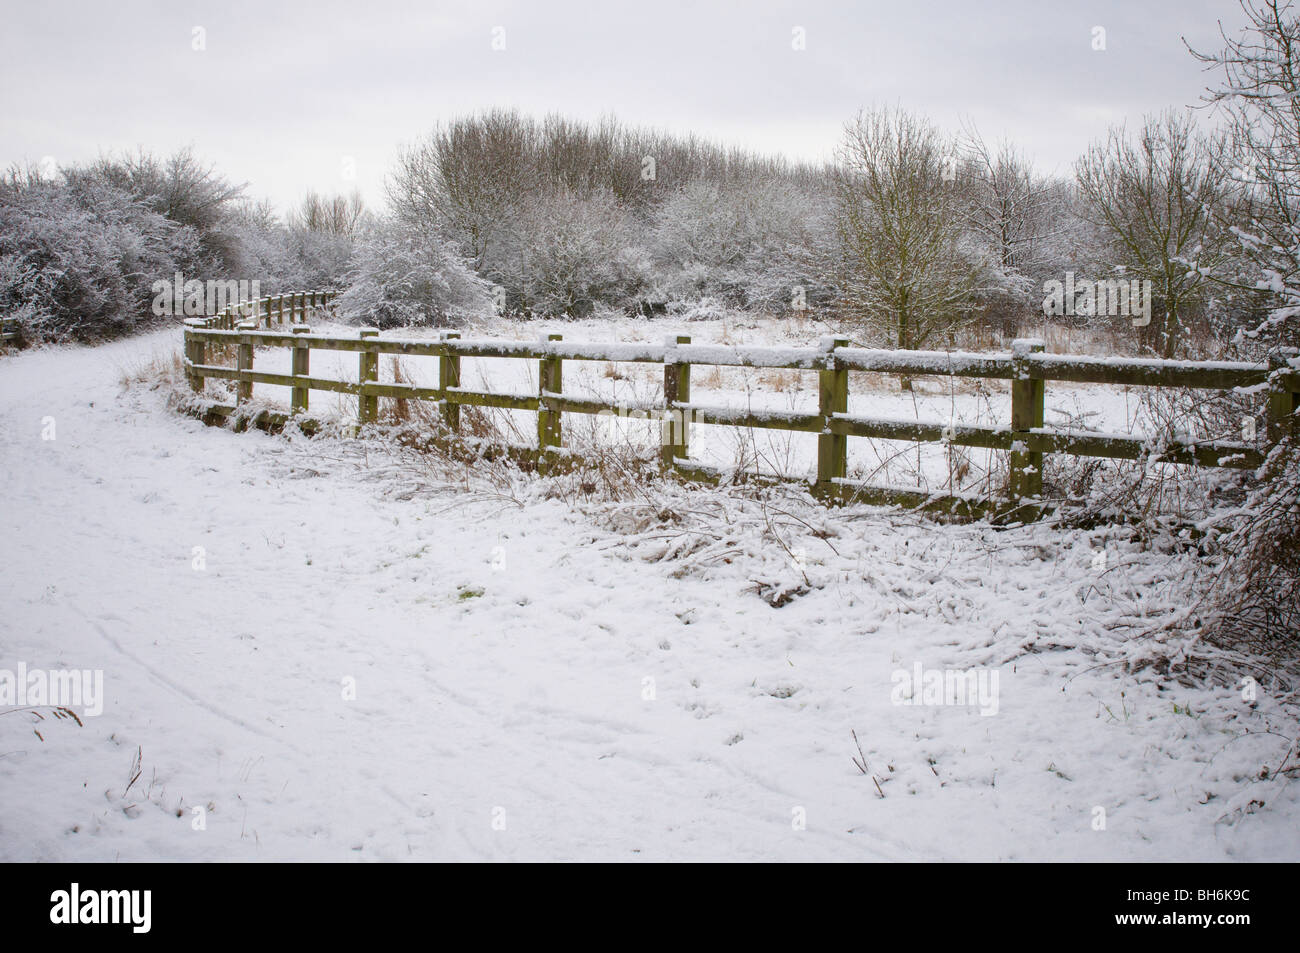 snowy scene winter fences and gate Stock Photo